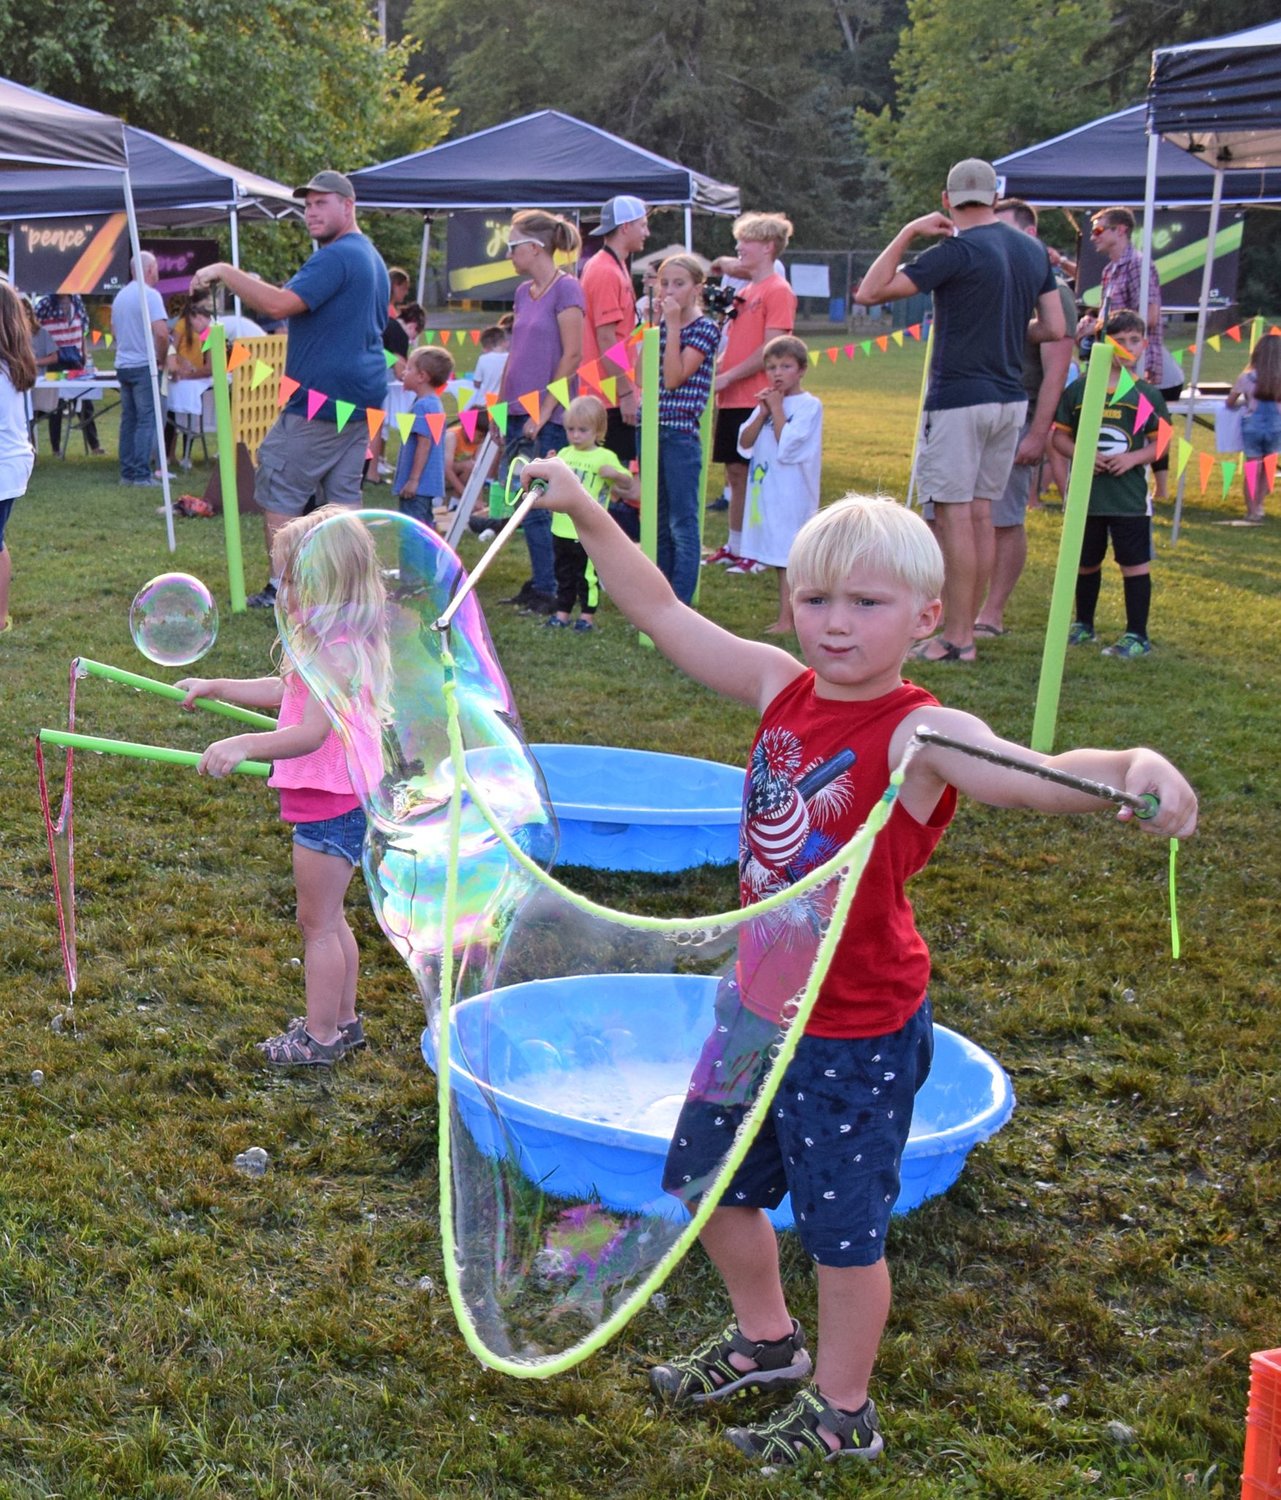 Sawyer Gallo enjoys the large bubbles at the Revival’s Play area.